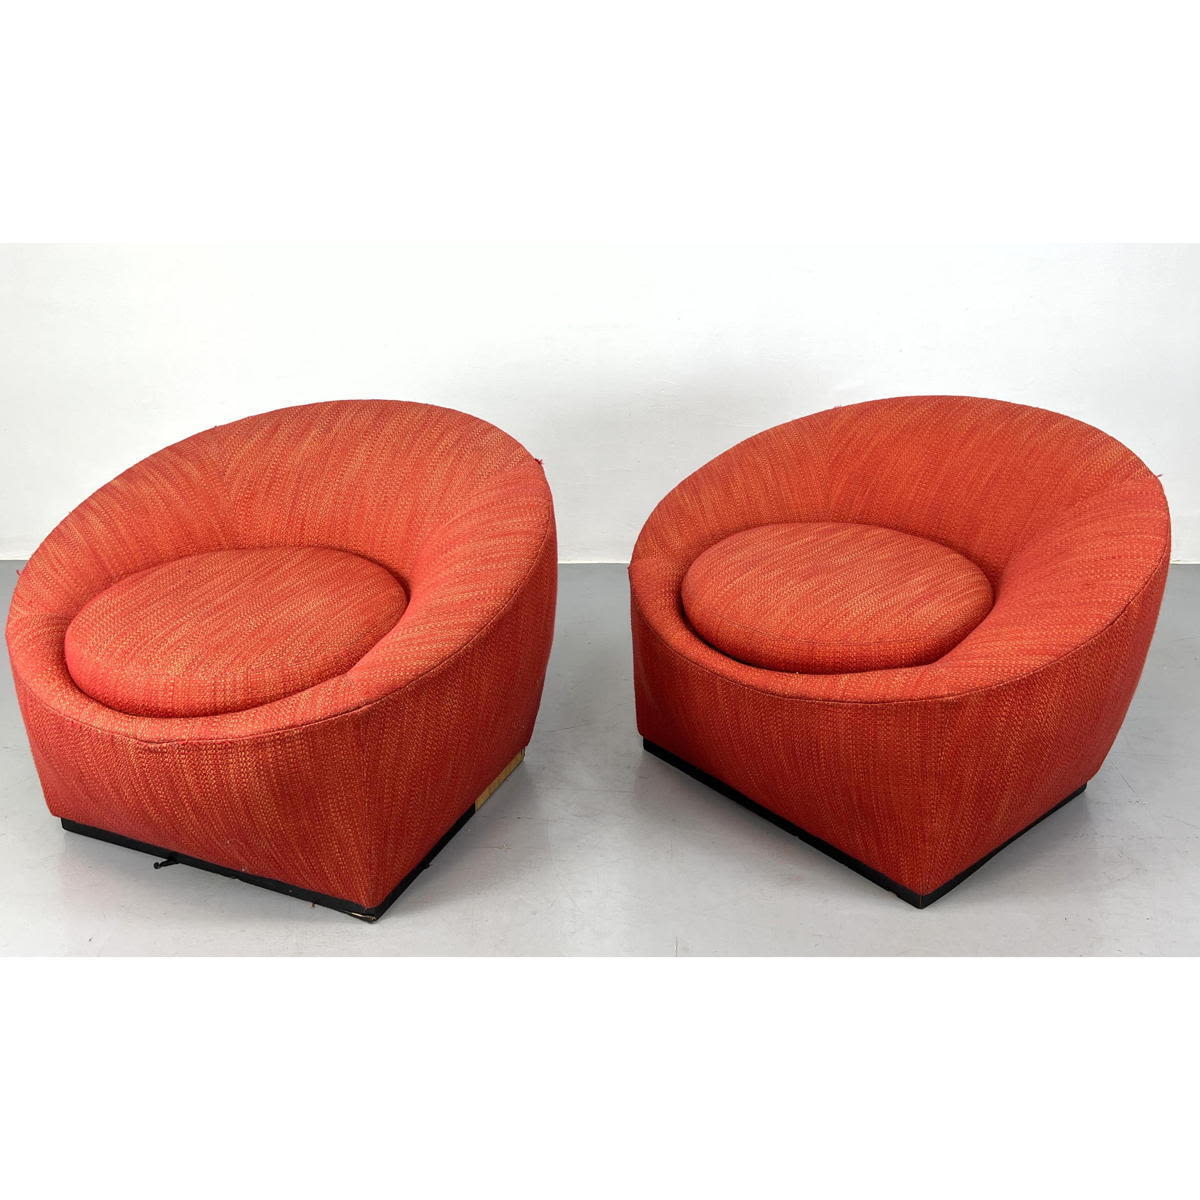 Pair Large Upholstered Lounge Chairs.